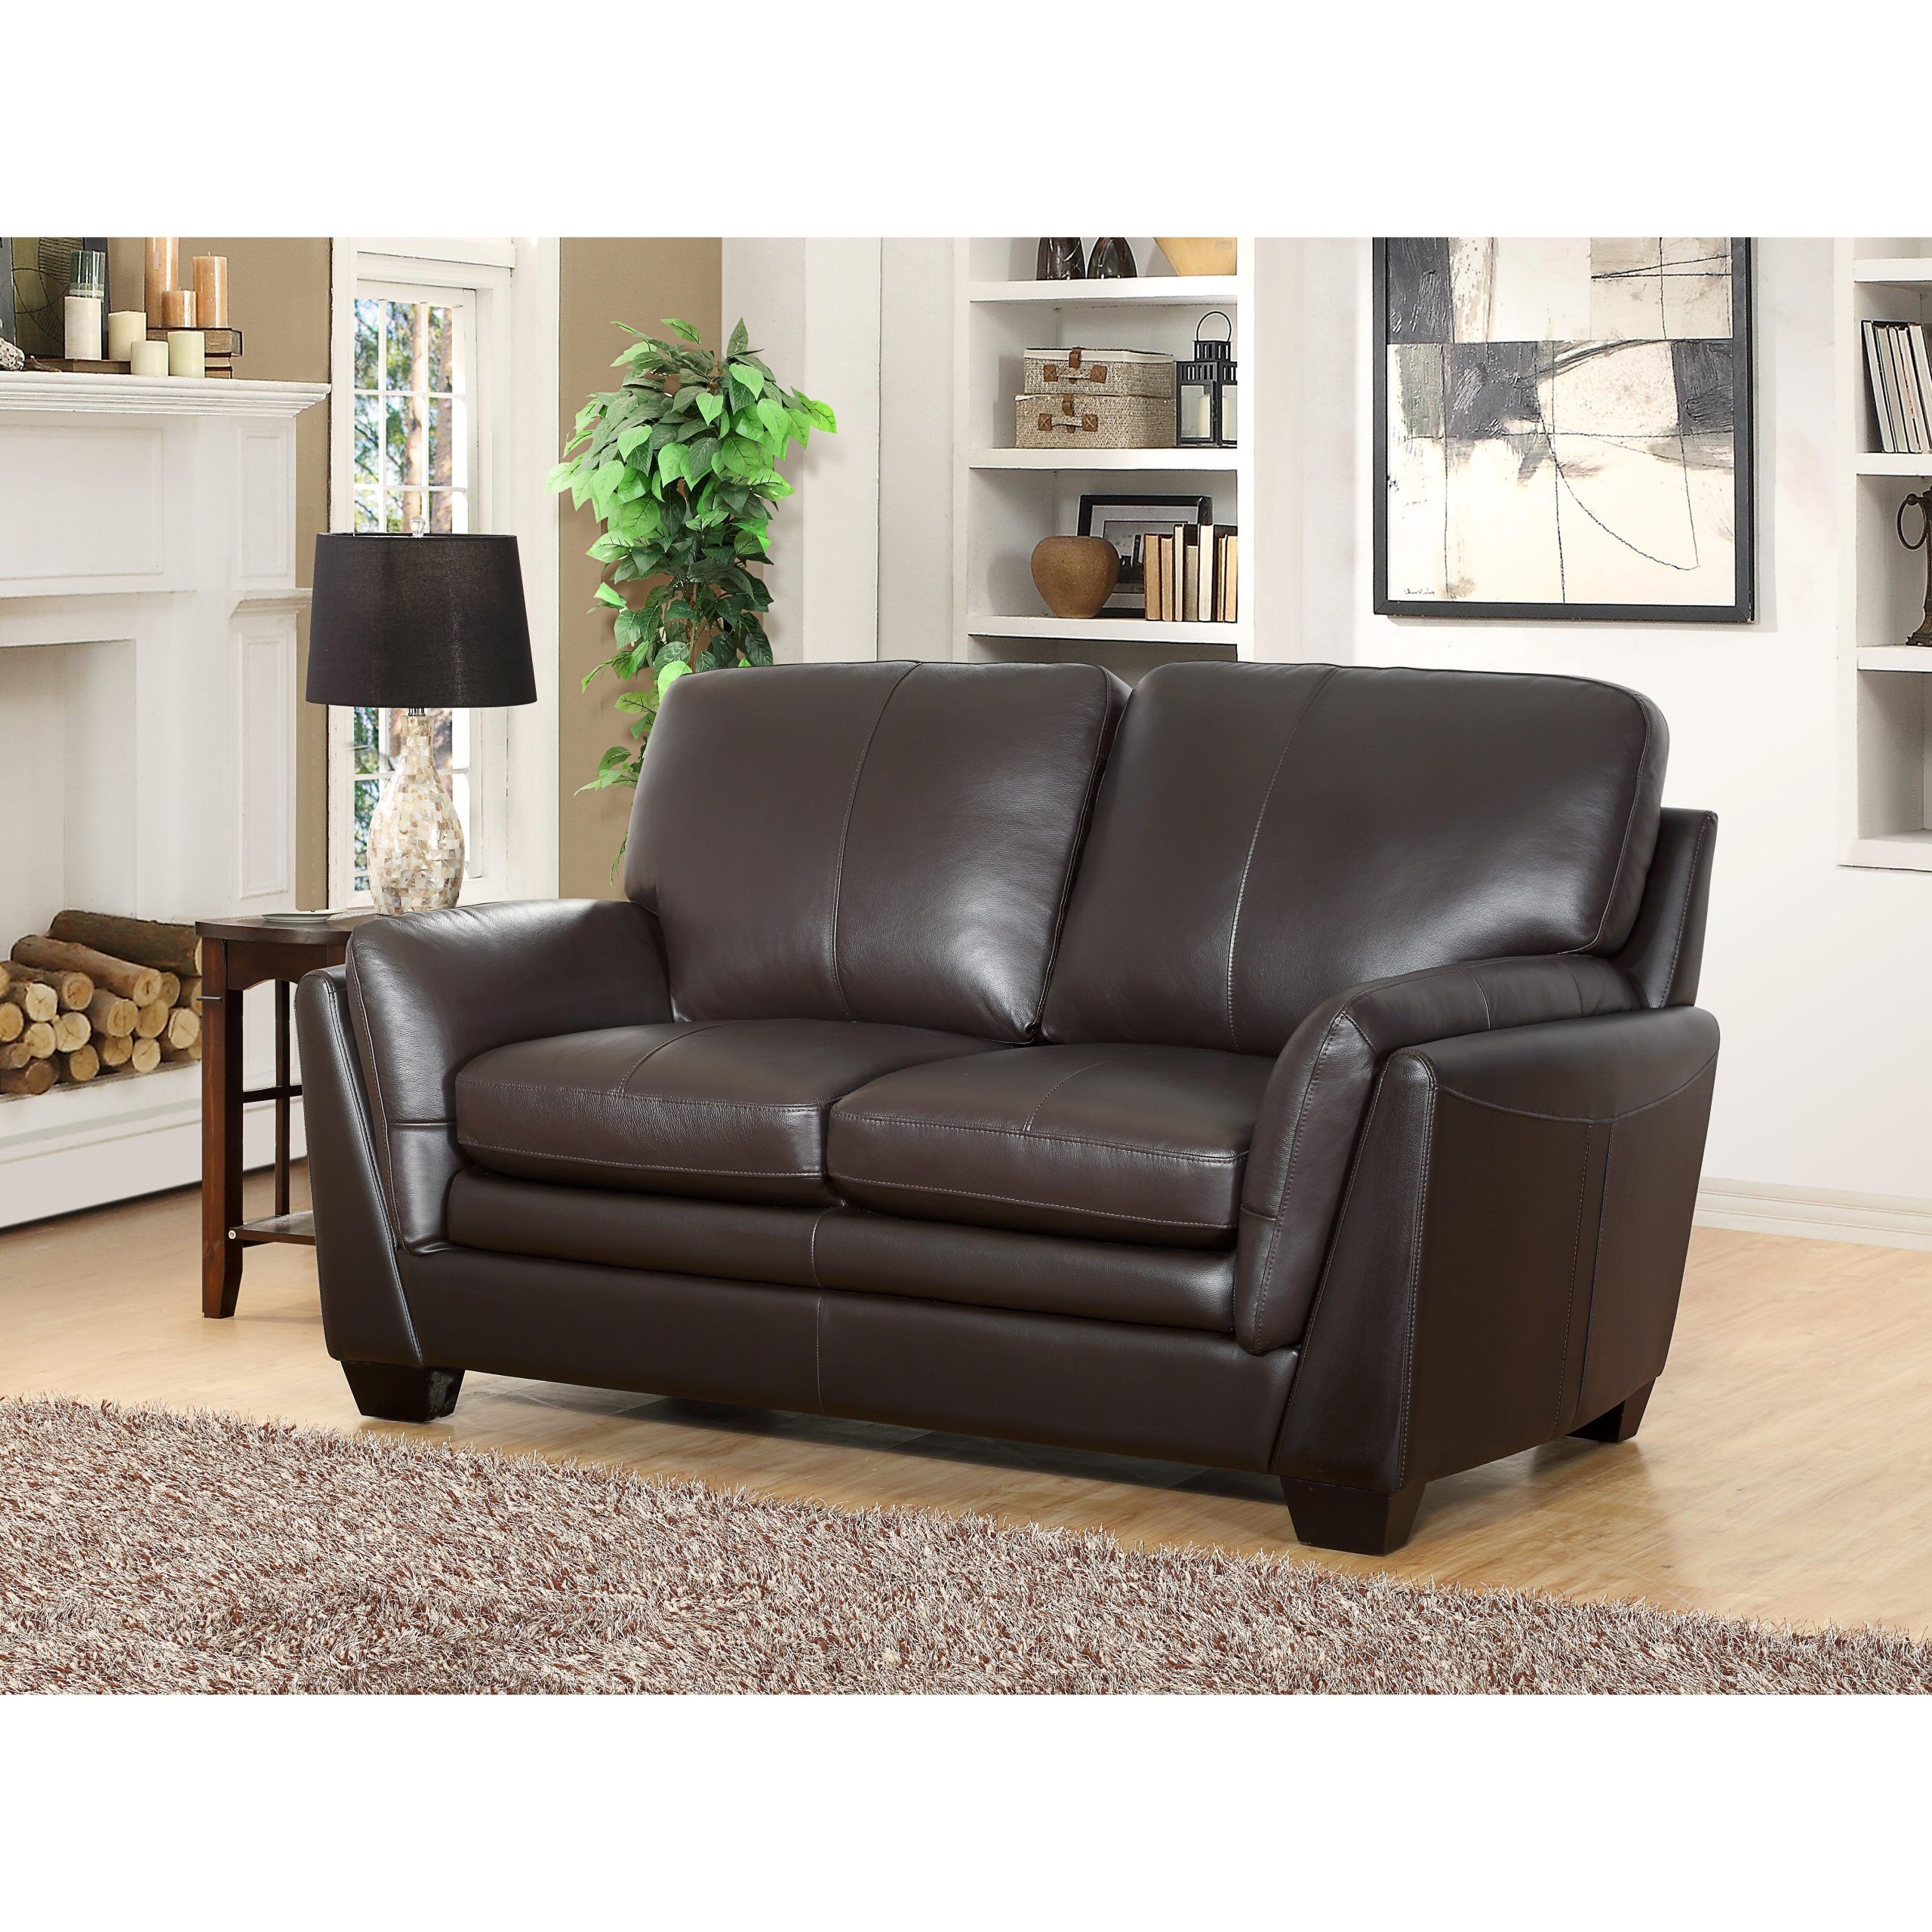 Darby Home Co Whitstran Top Grain Leather Sofa And Loveseat Set | Wayfair Regarding Top Grain Leather Loveseats (View 20 of 20)